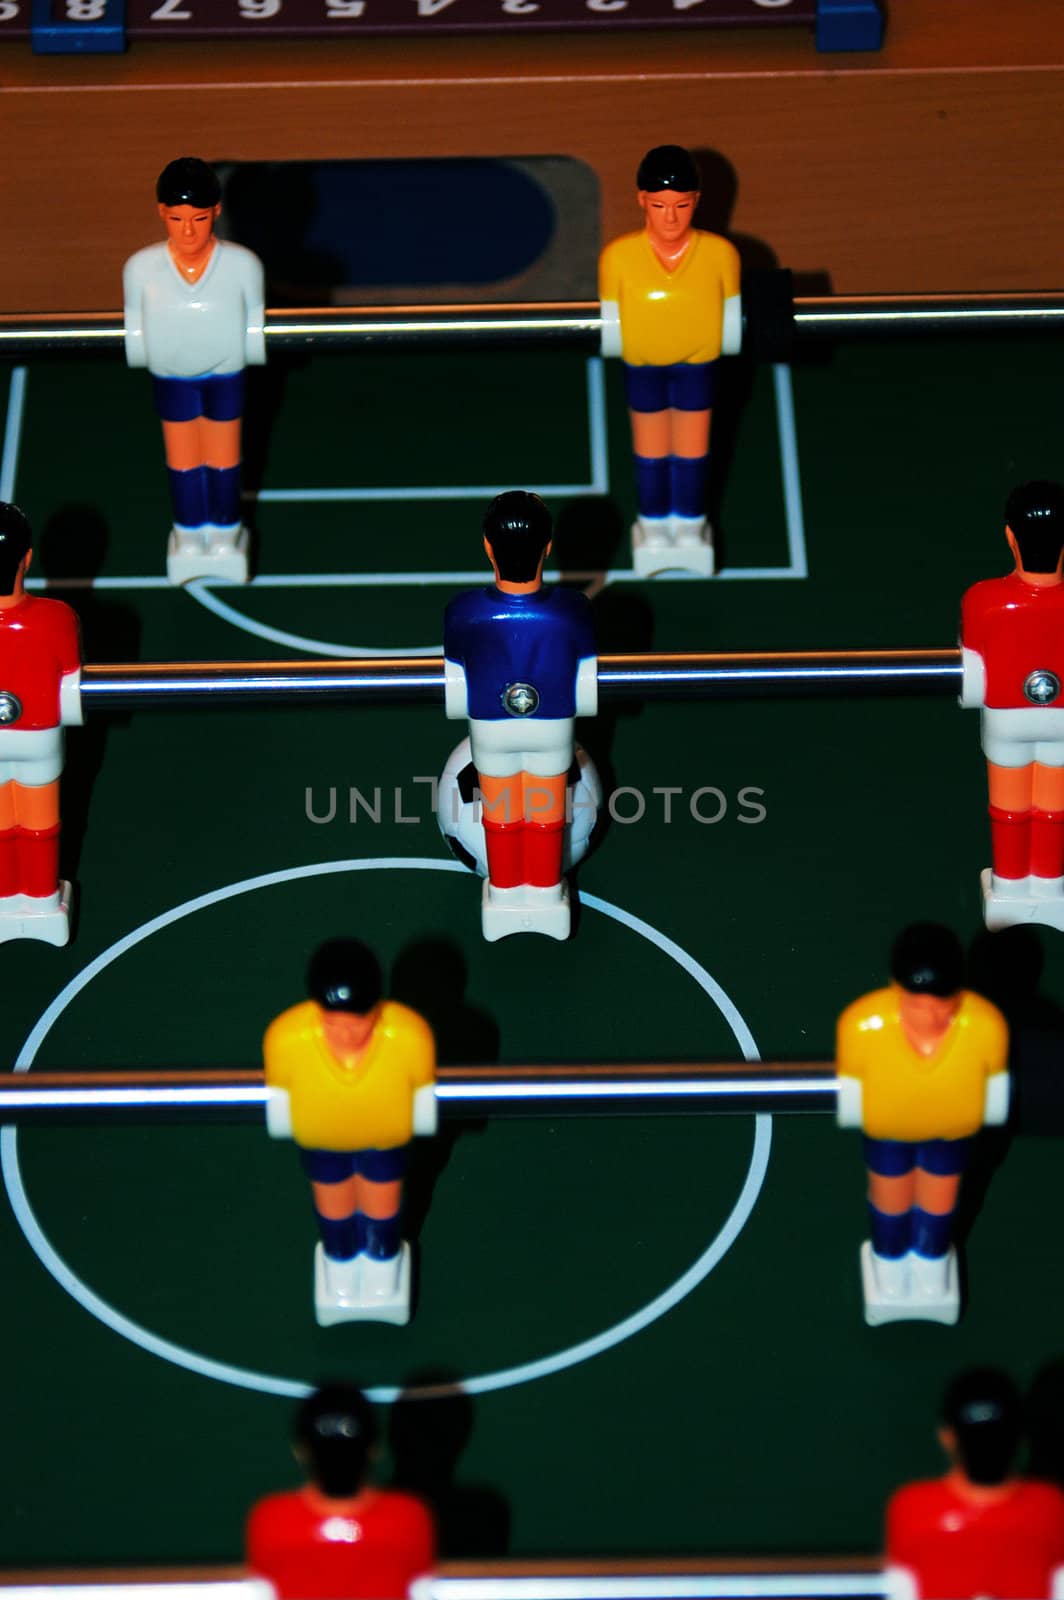 A shot lined up on a foosball table